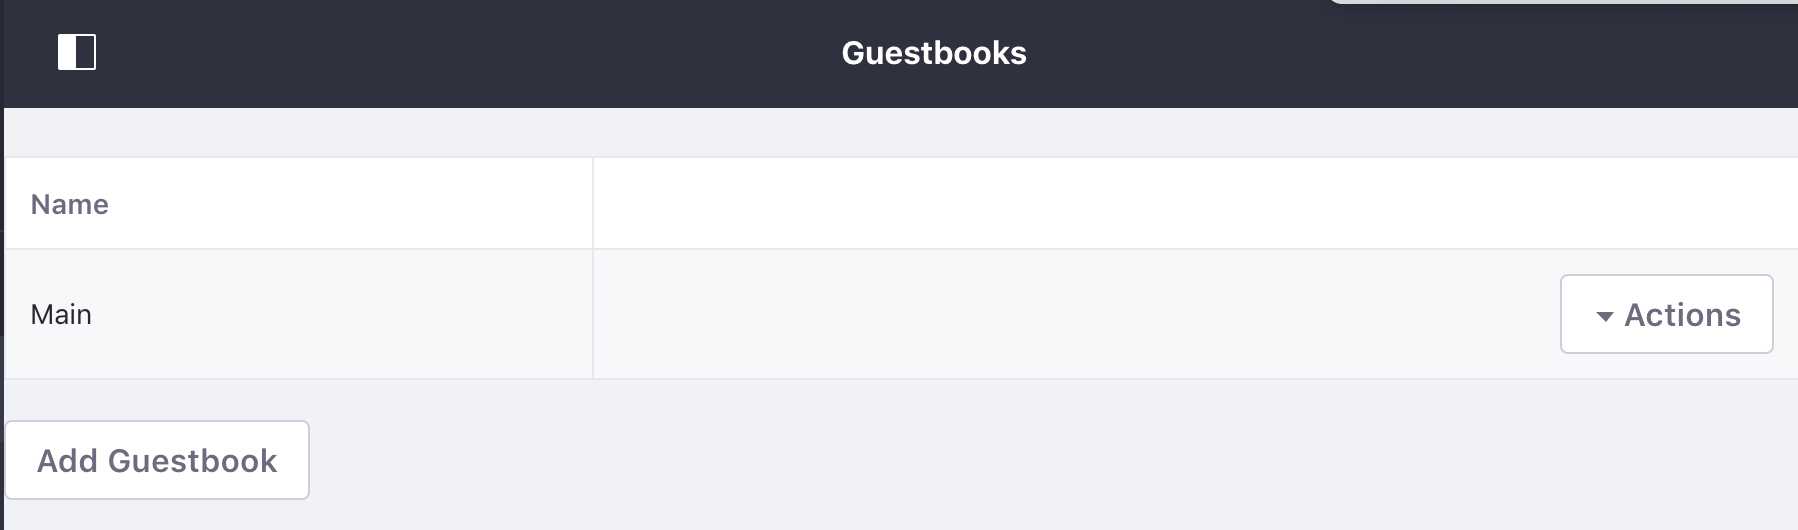 Figure 1: The Guestbook Admin portlet lets administrators add or edit guestbooks, configure their permissions, or delete them.